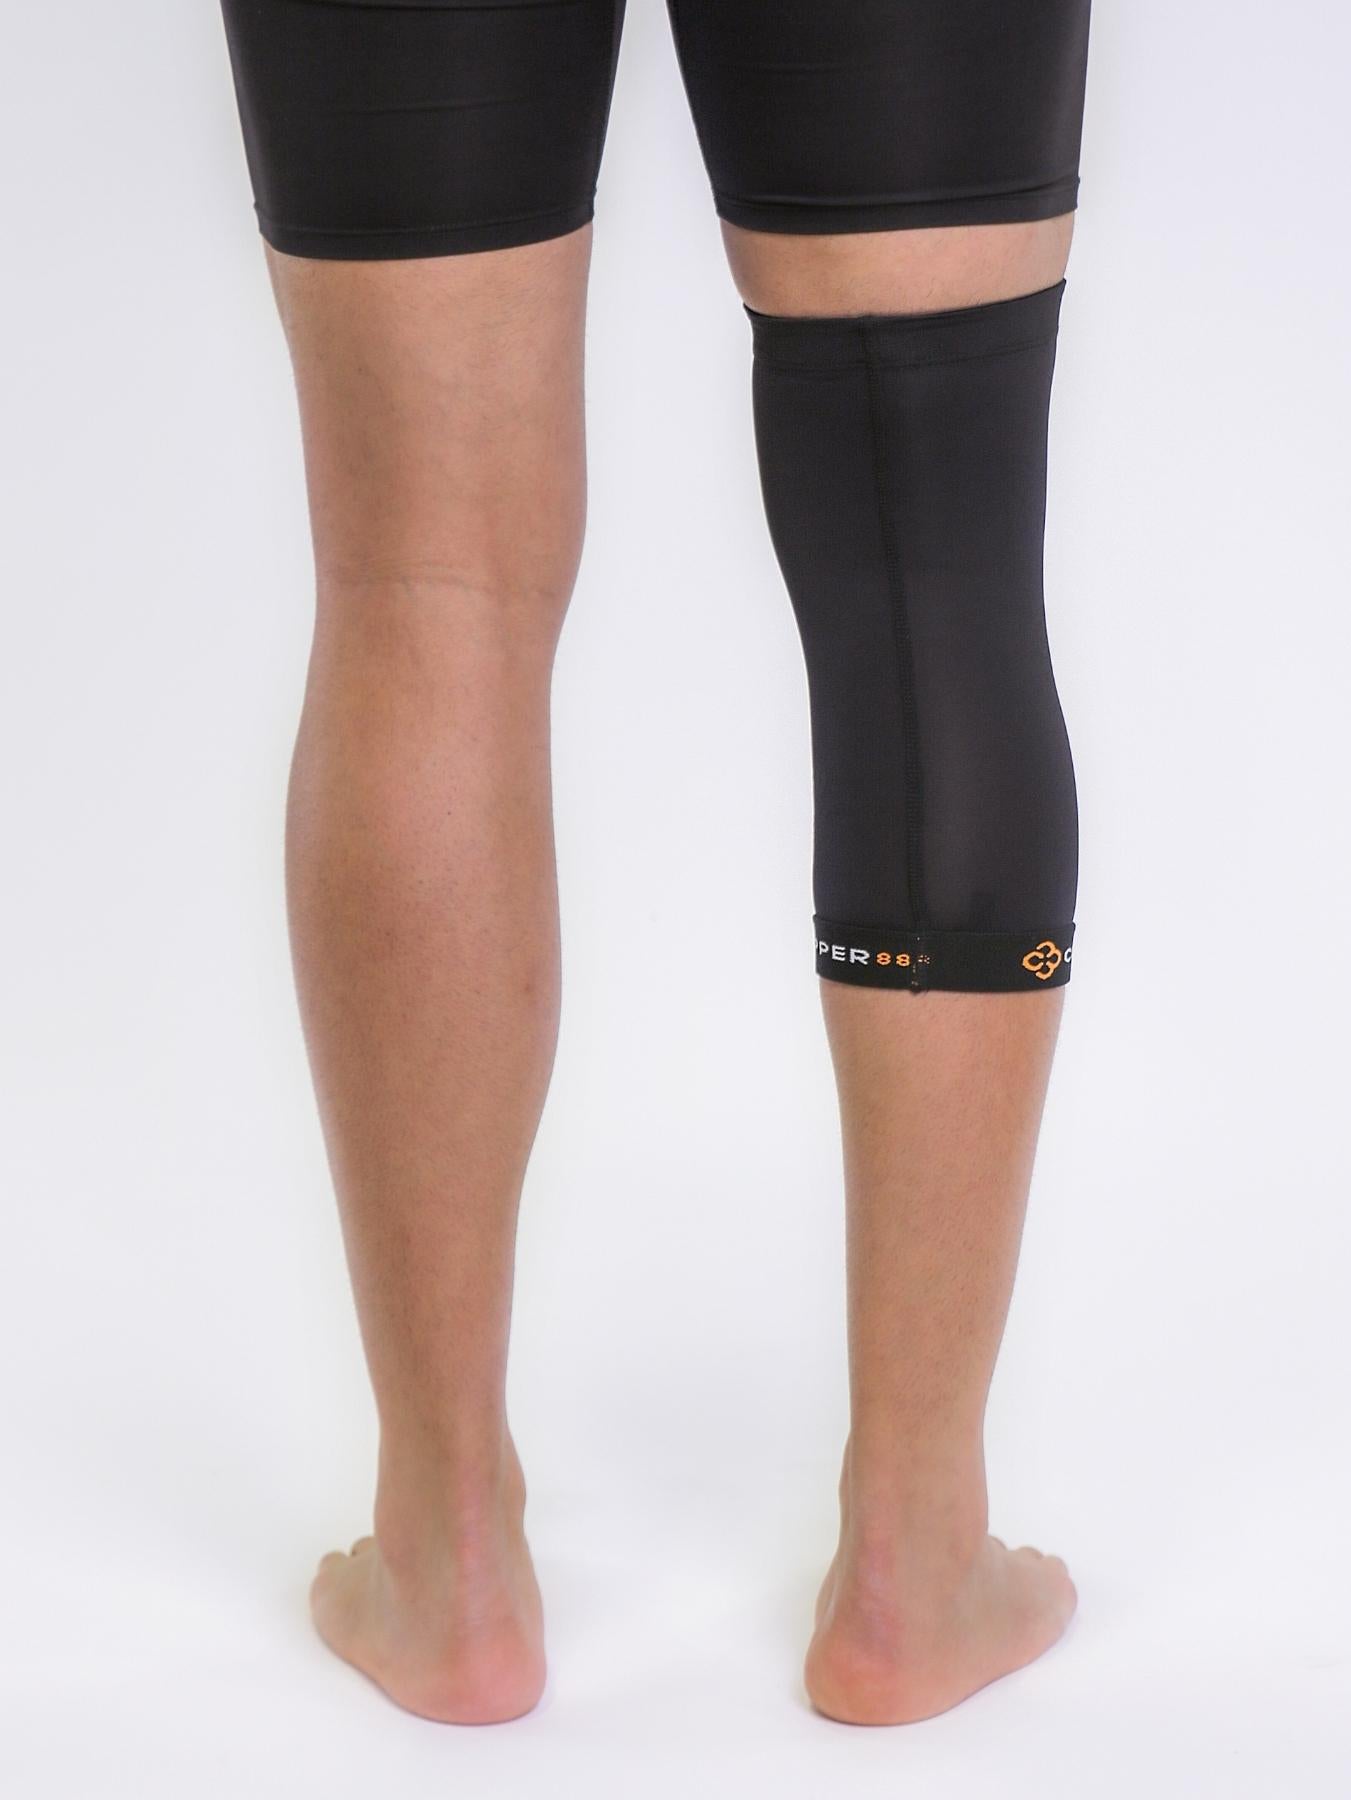 Copper Knee Compression Brace | Buy Copper Knee Braces at CopperJoint